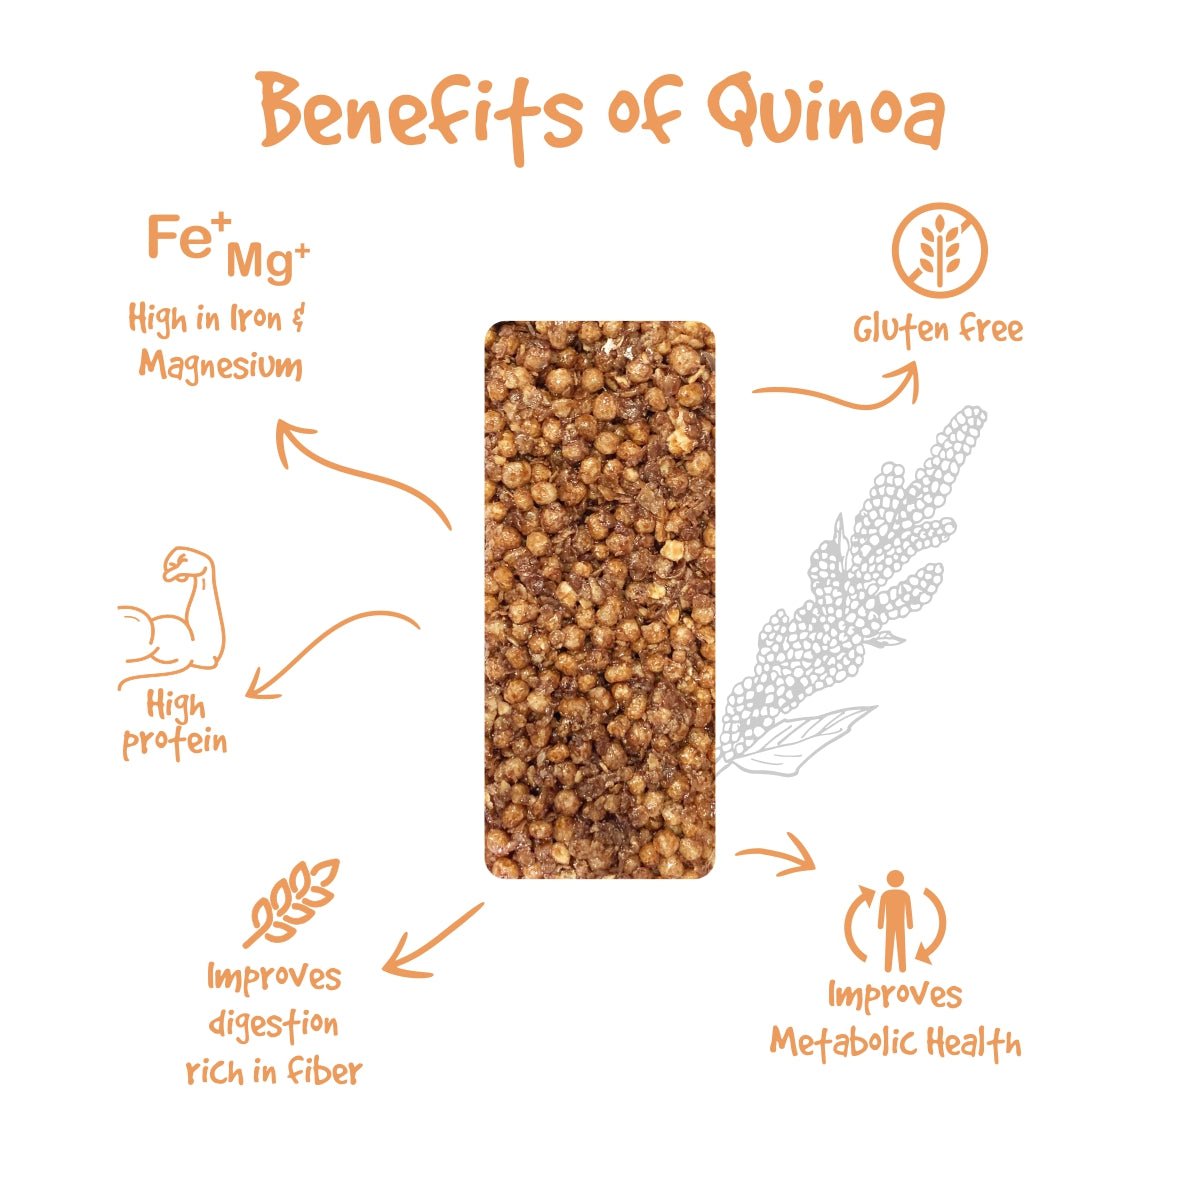 Wholesome Quinoa Bars - Shop Online at Best Price - Eat Anytime